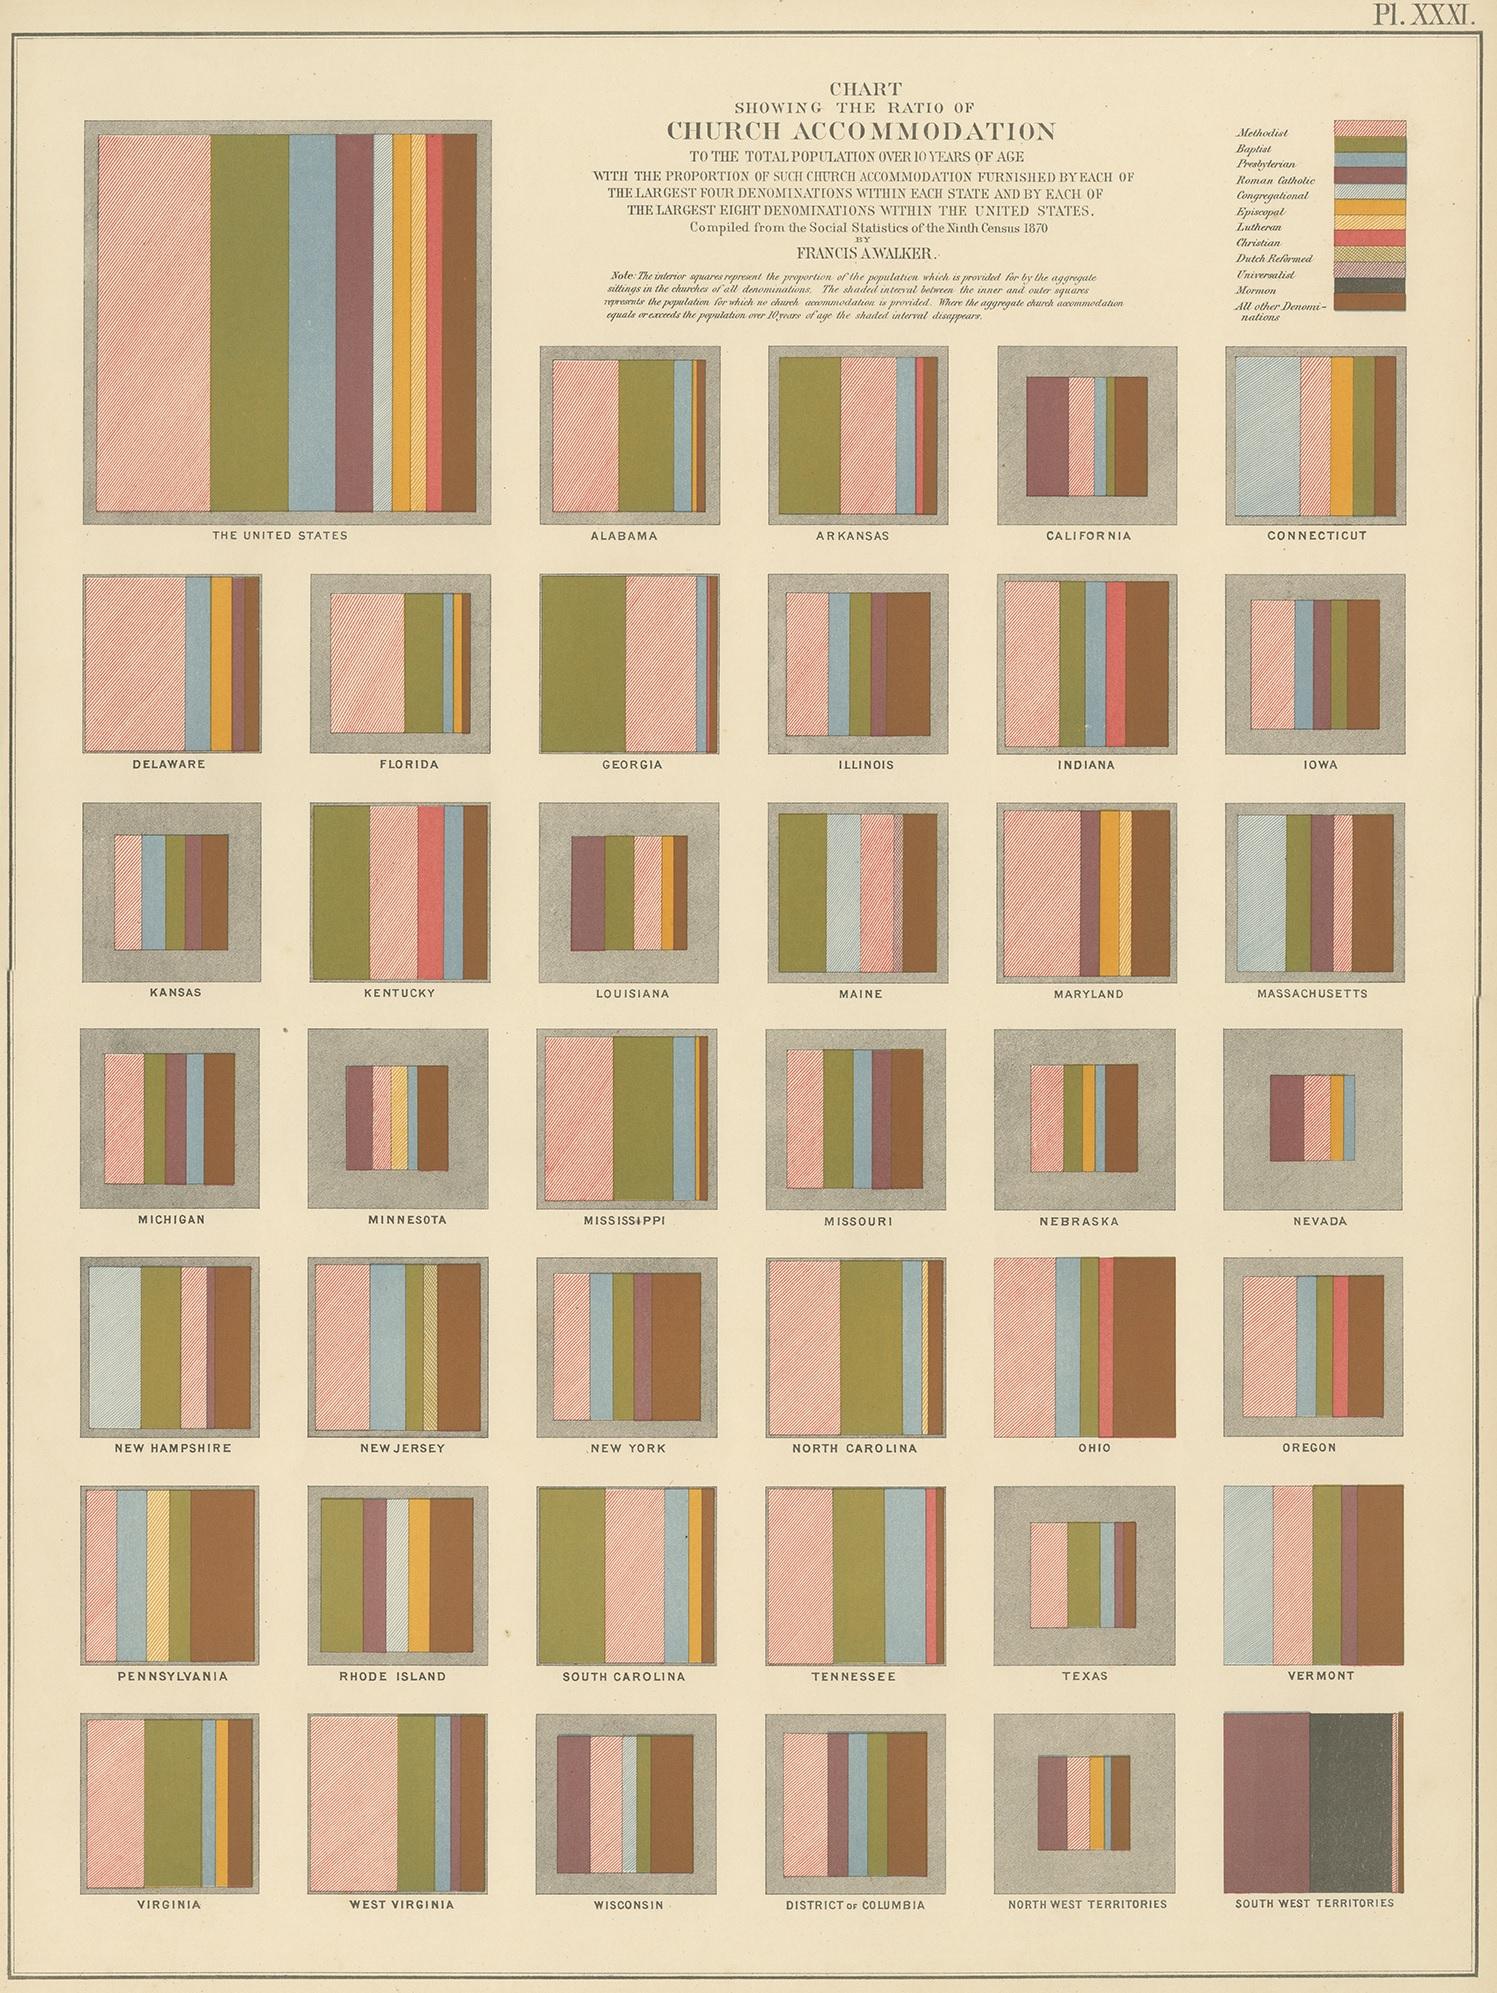 Antique chart titled 'Chart showing the ratio of church accommodation to the total population over 10 years of age with the proportion of such church accommodation furnished by each of the largest four denominations within each state and by each of